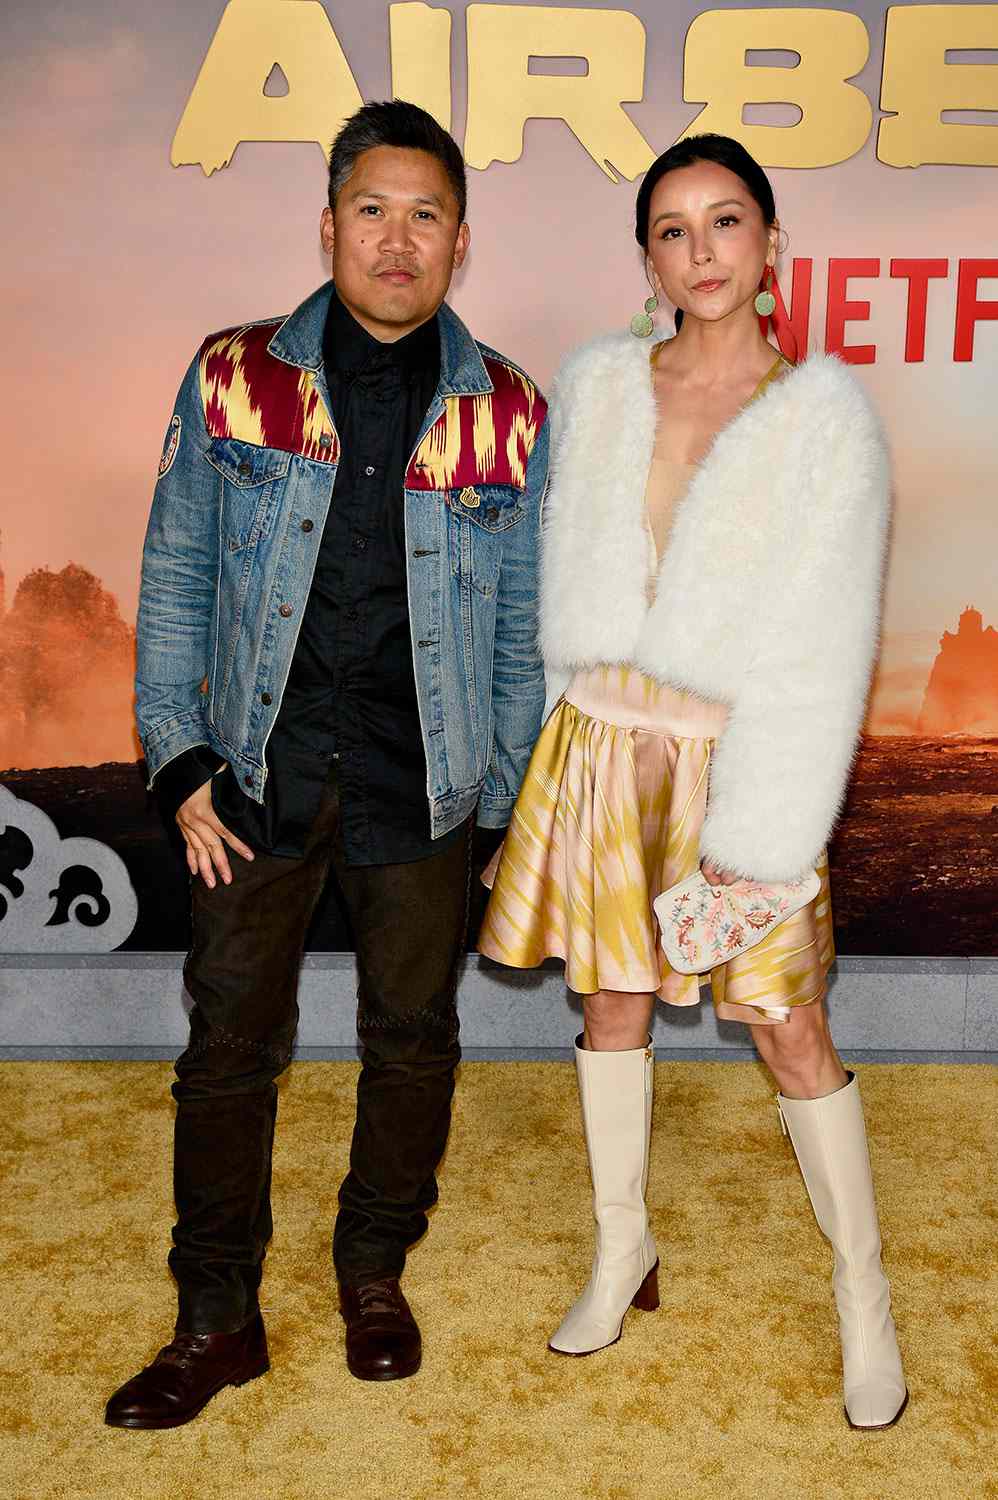 LOS ANGELES, CALIFORNIA - FEBRUARY 15: (L-R) Dante Basco and Alice Rehemutula attend Netflix's "Avatar: The Last Airbender" World Premiere Event at The Egyptian Theatre Hollywood on February 15, 2024 in Los Angeles, California. 